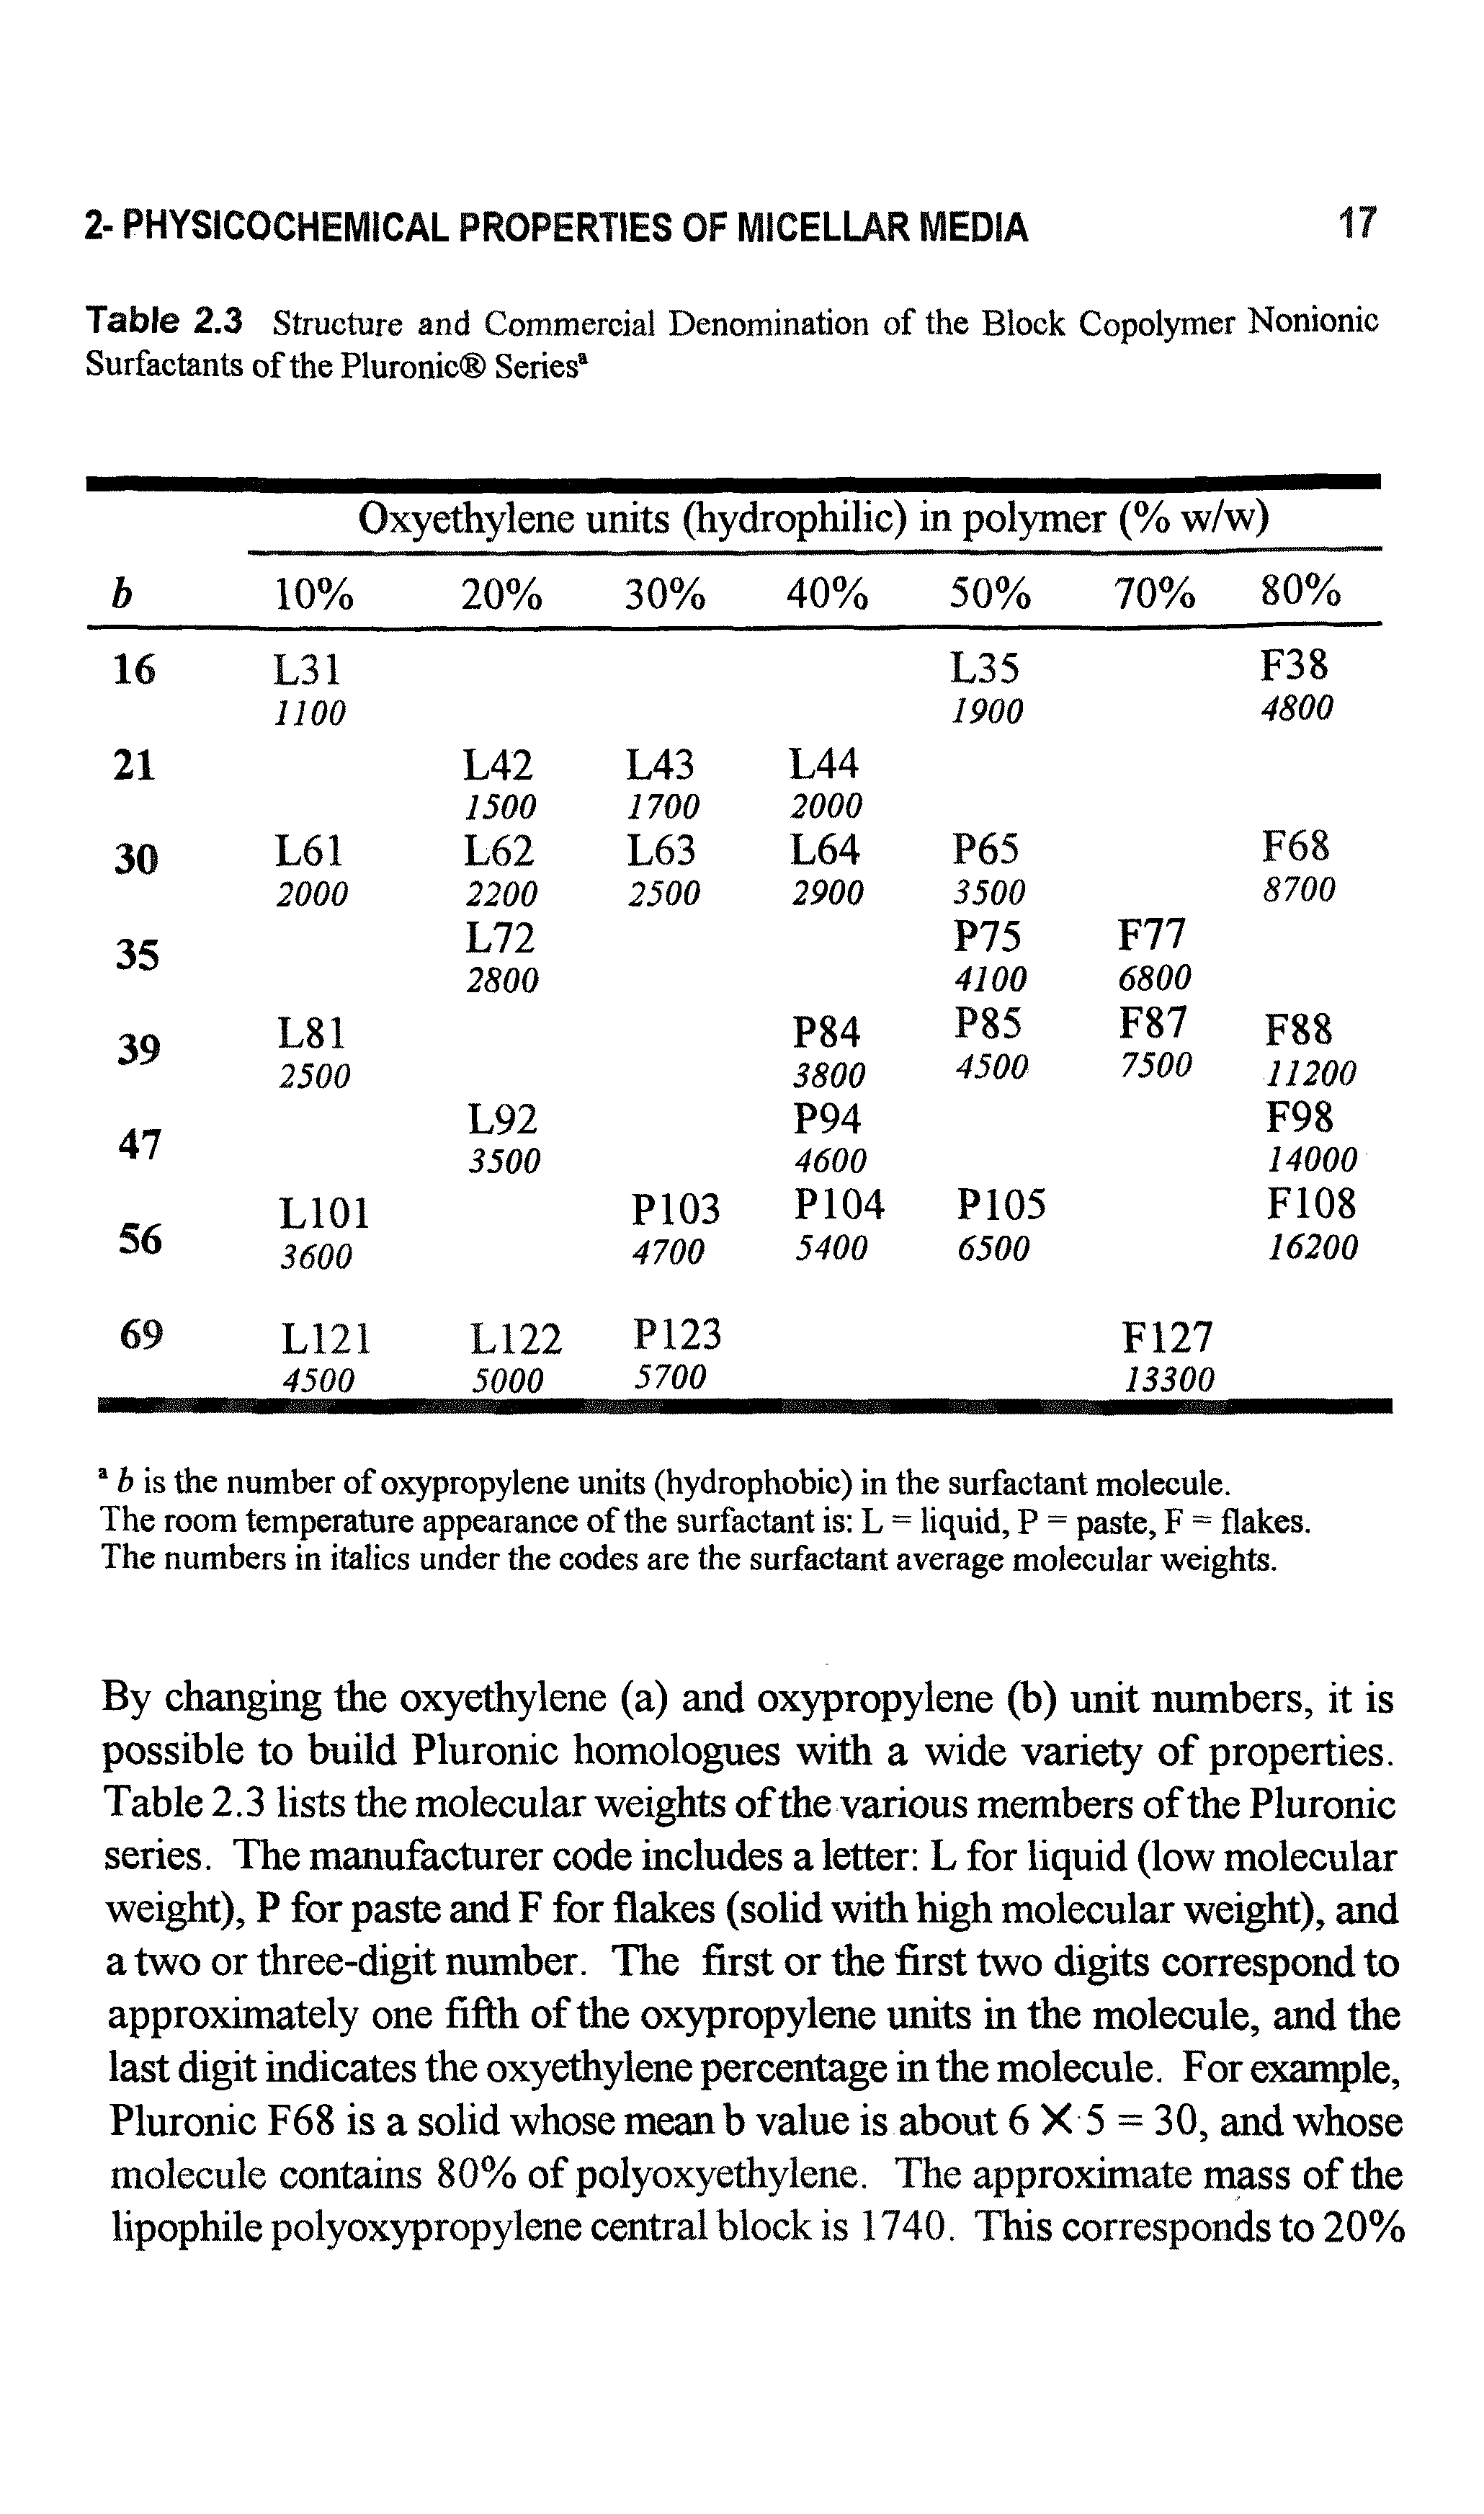 Table 2.3 Structure and Commercial Denomination of the Block Copolymer Nonionic Surfactants of the Pluronic Series ...